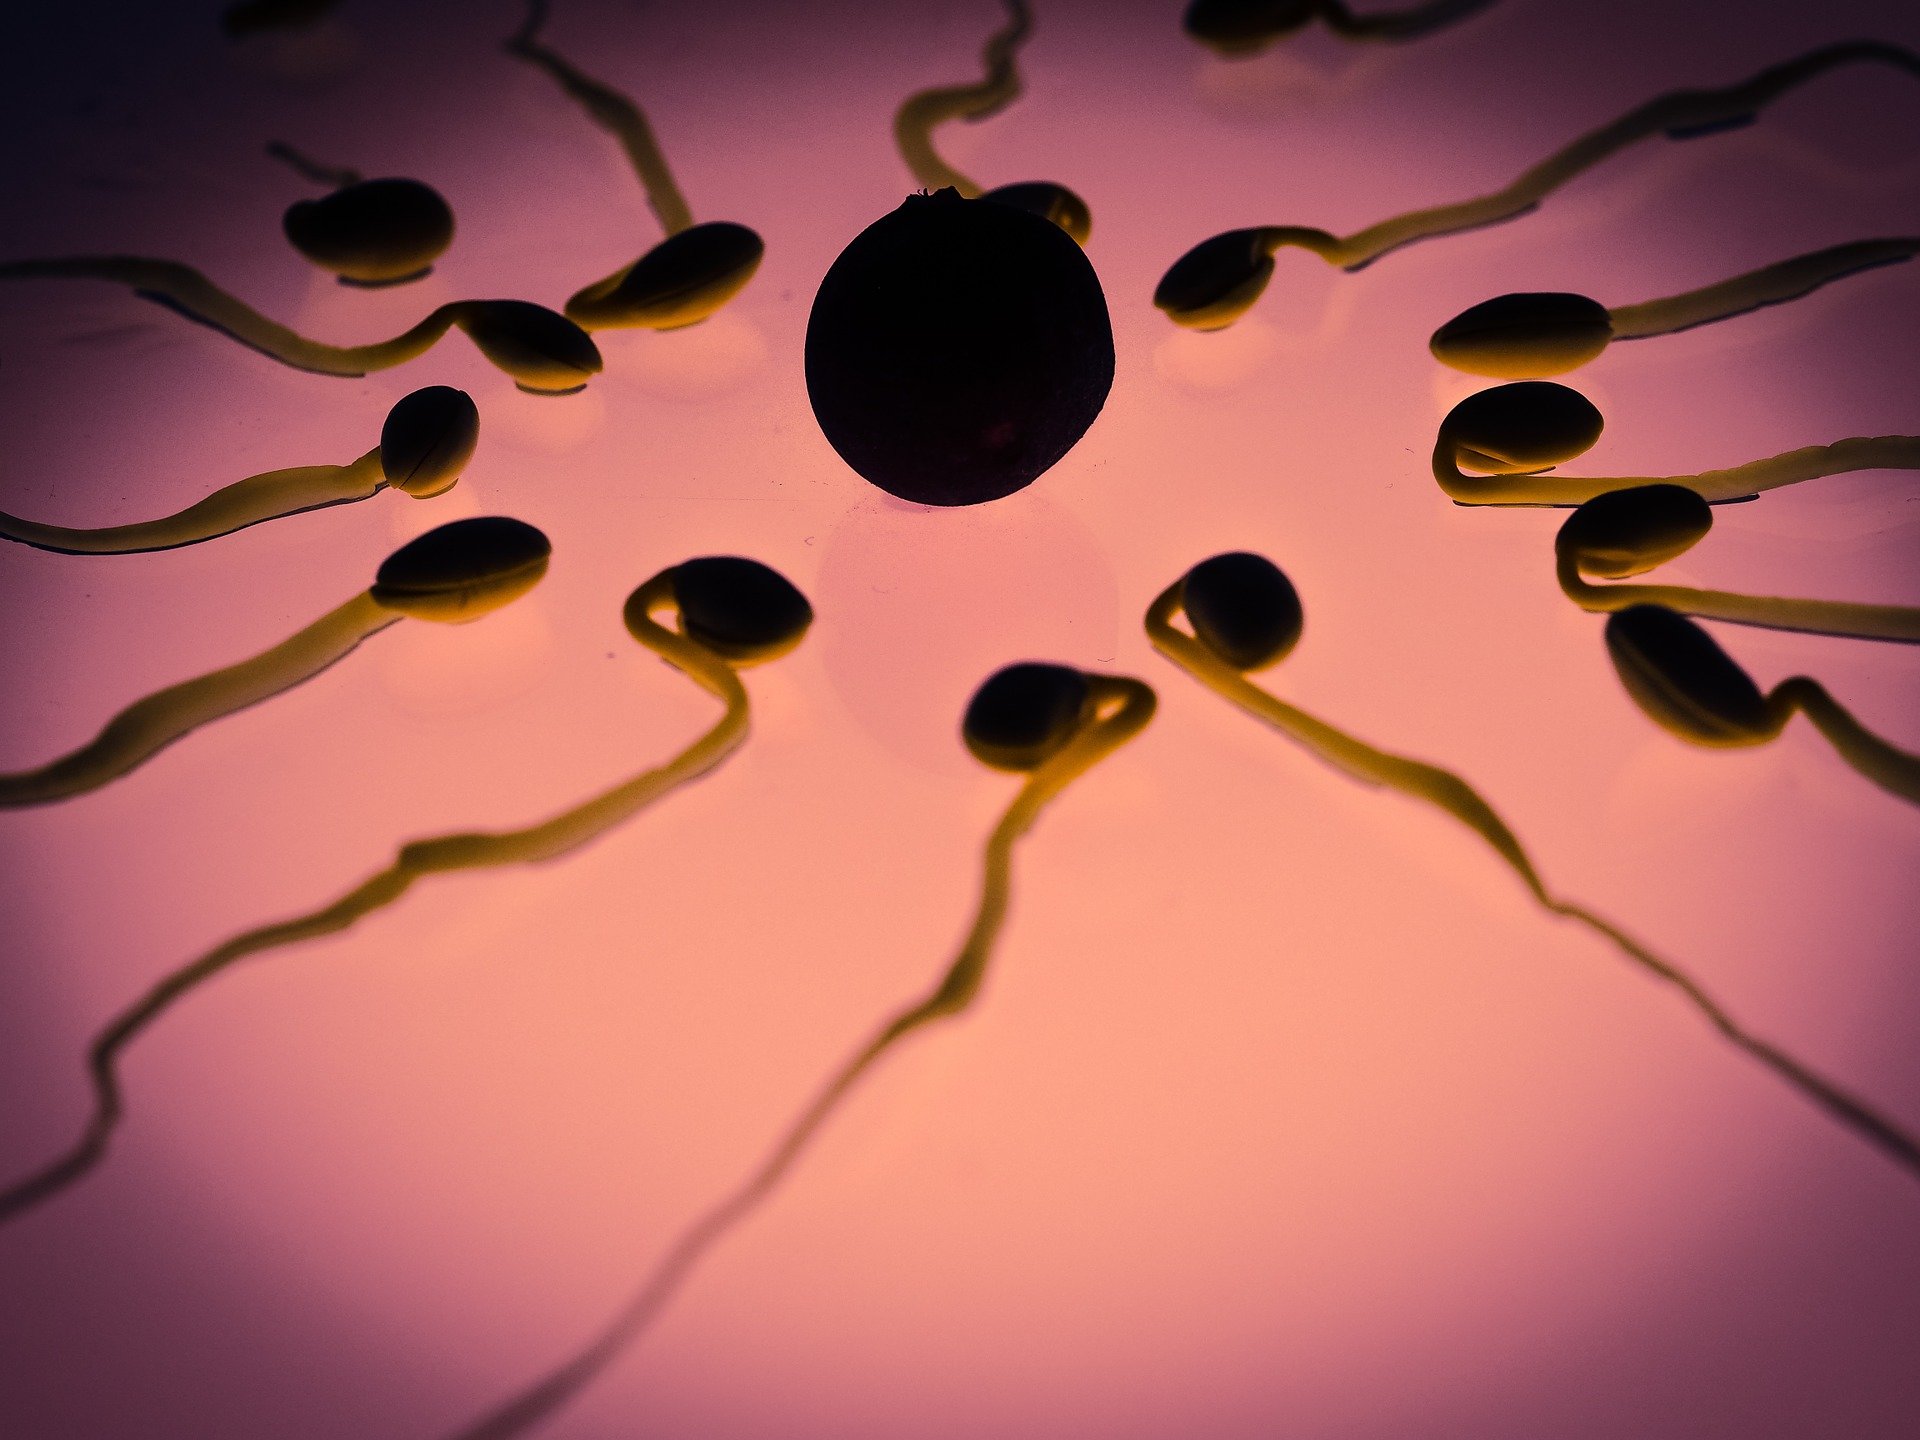 COVID-19 infection may reduce fertility in men